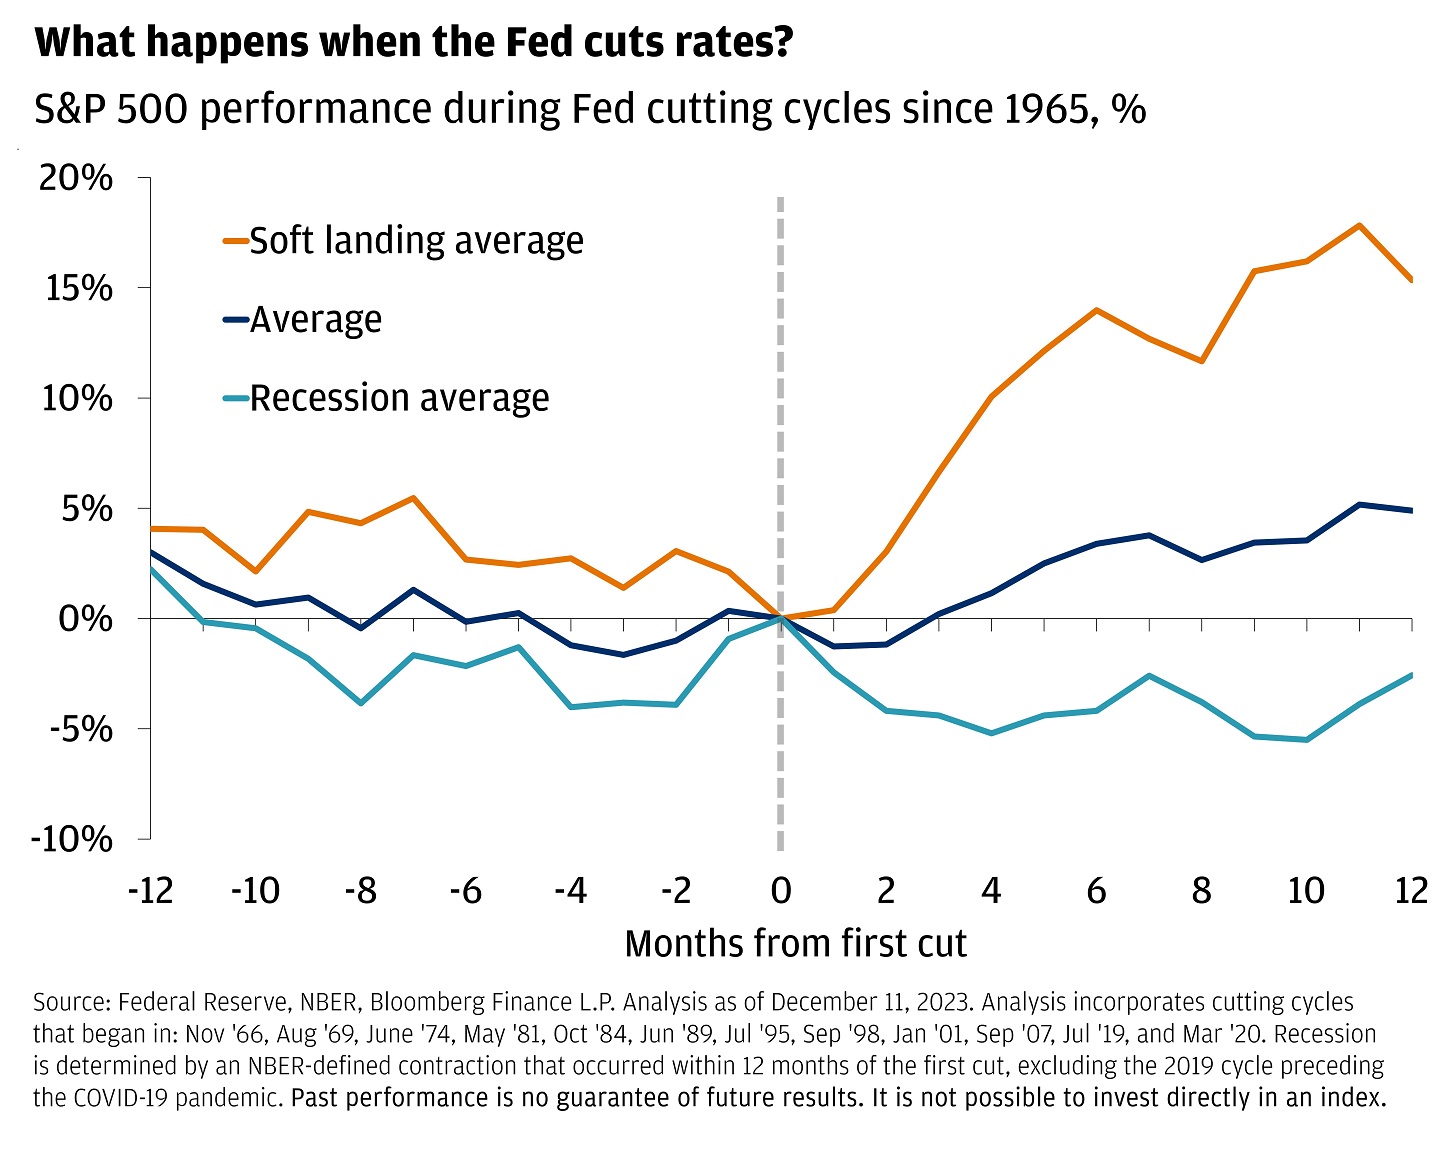 Line chart showing S&P 500 performance during Fed cutting cycles since 1965.